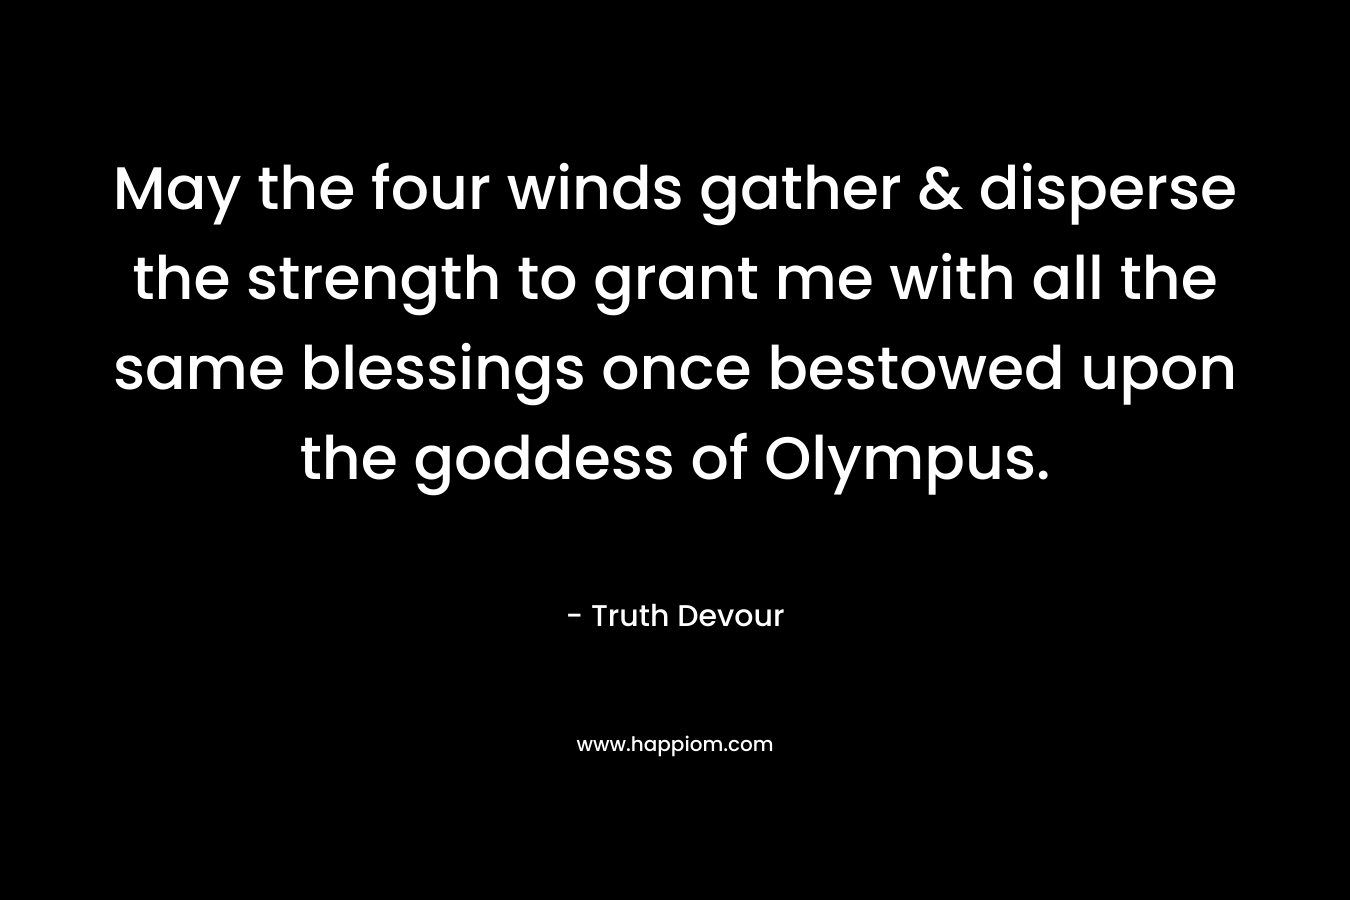 May the four winds gather & disperse the strength to grant me with all the same blessings once bestowed upon the goddess of Olympus. – Truth Devour